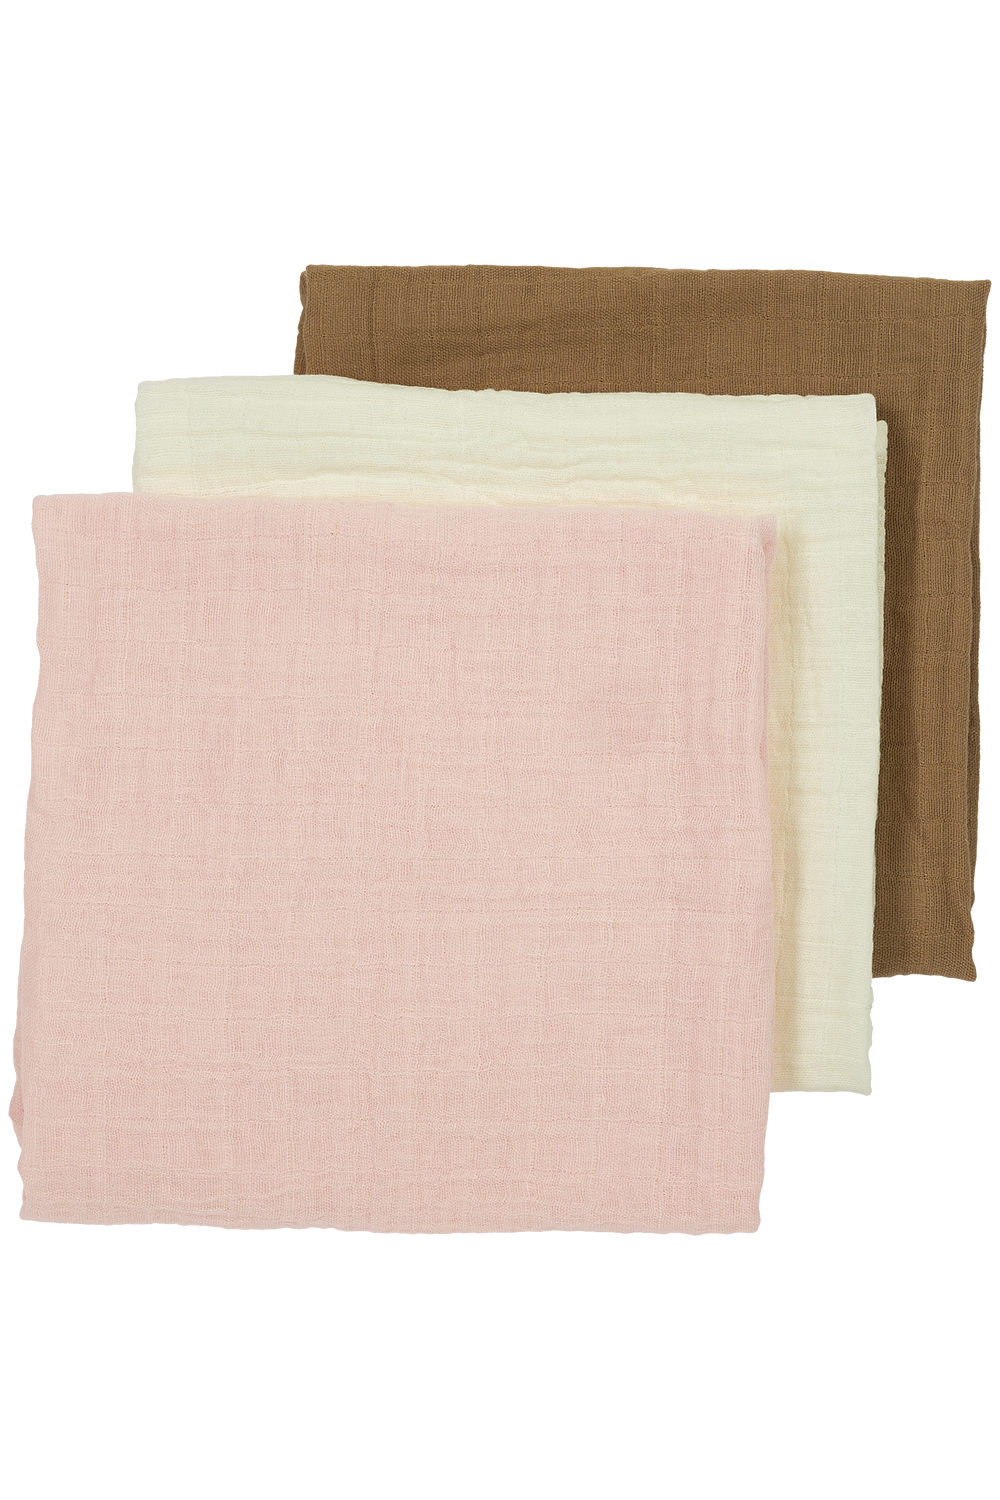 Pre-washed hydrofiele doeken 3-pack Uni - offwhite/soft pink/toffee - 70x70cm